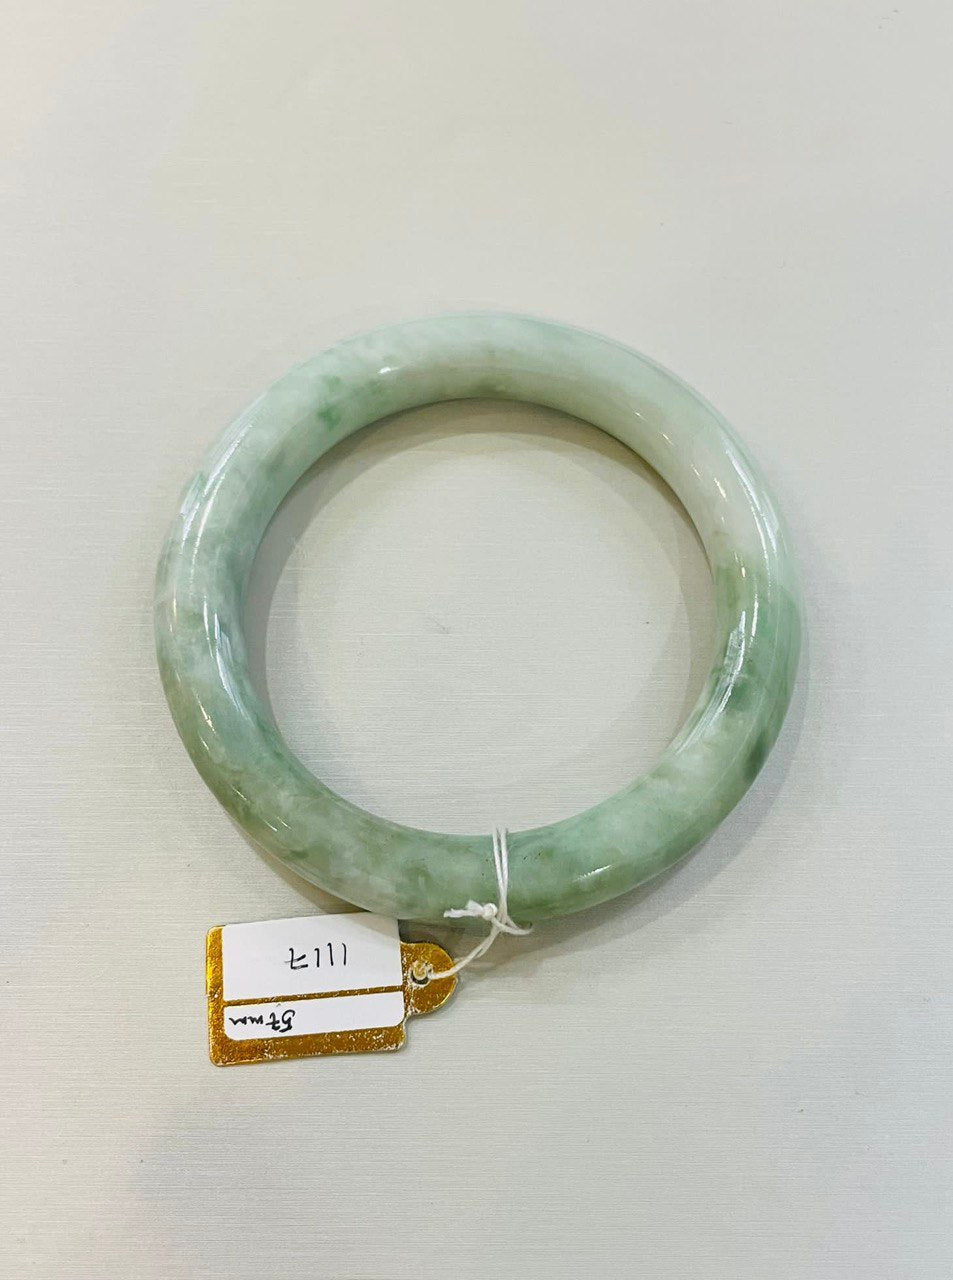 Grade A Natural Jade Bangle with certificate #1117